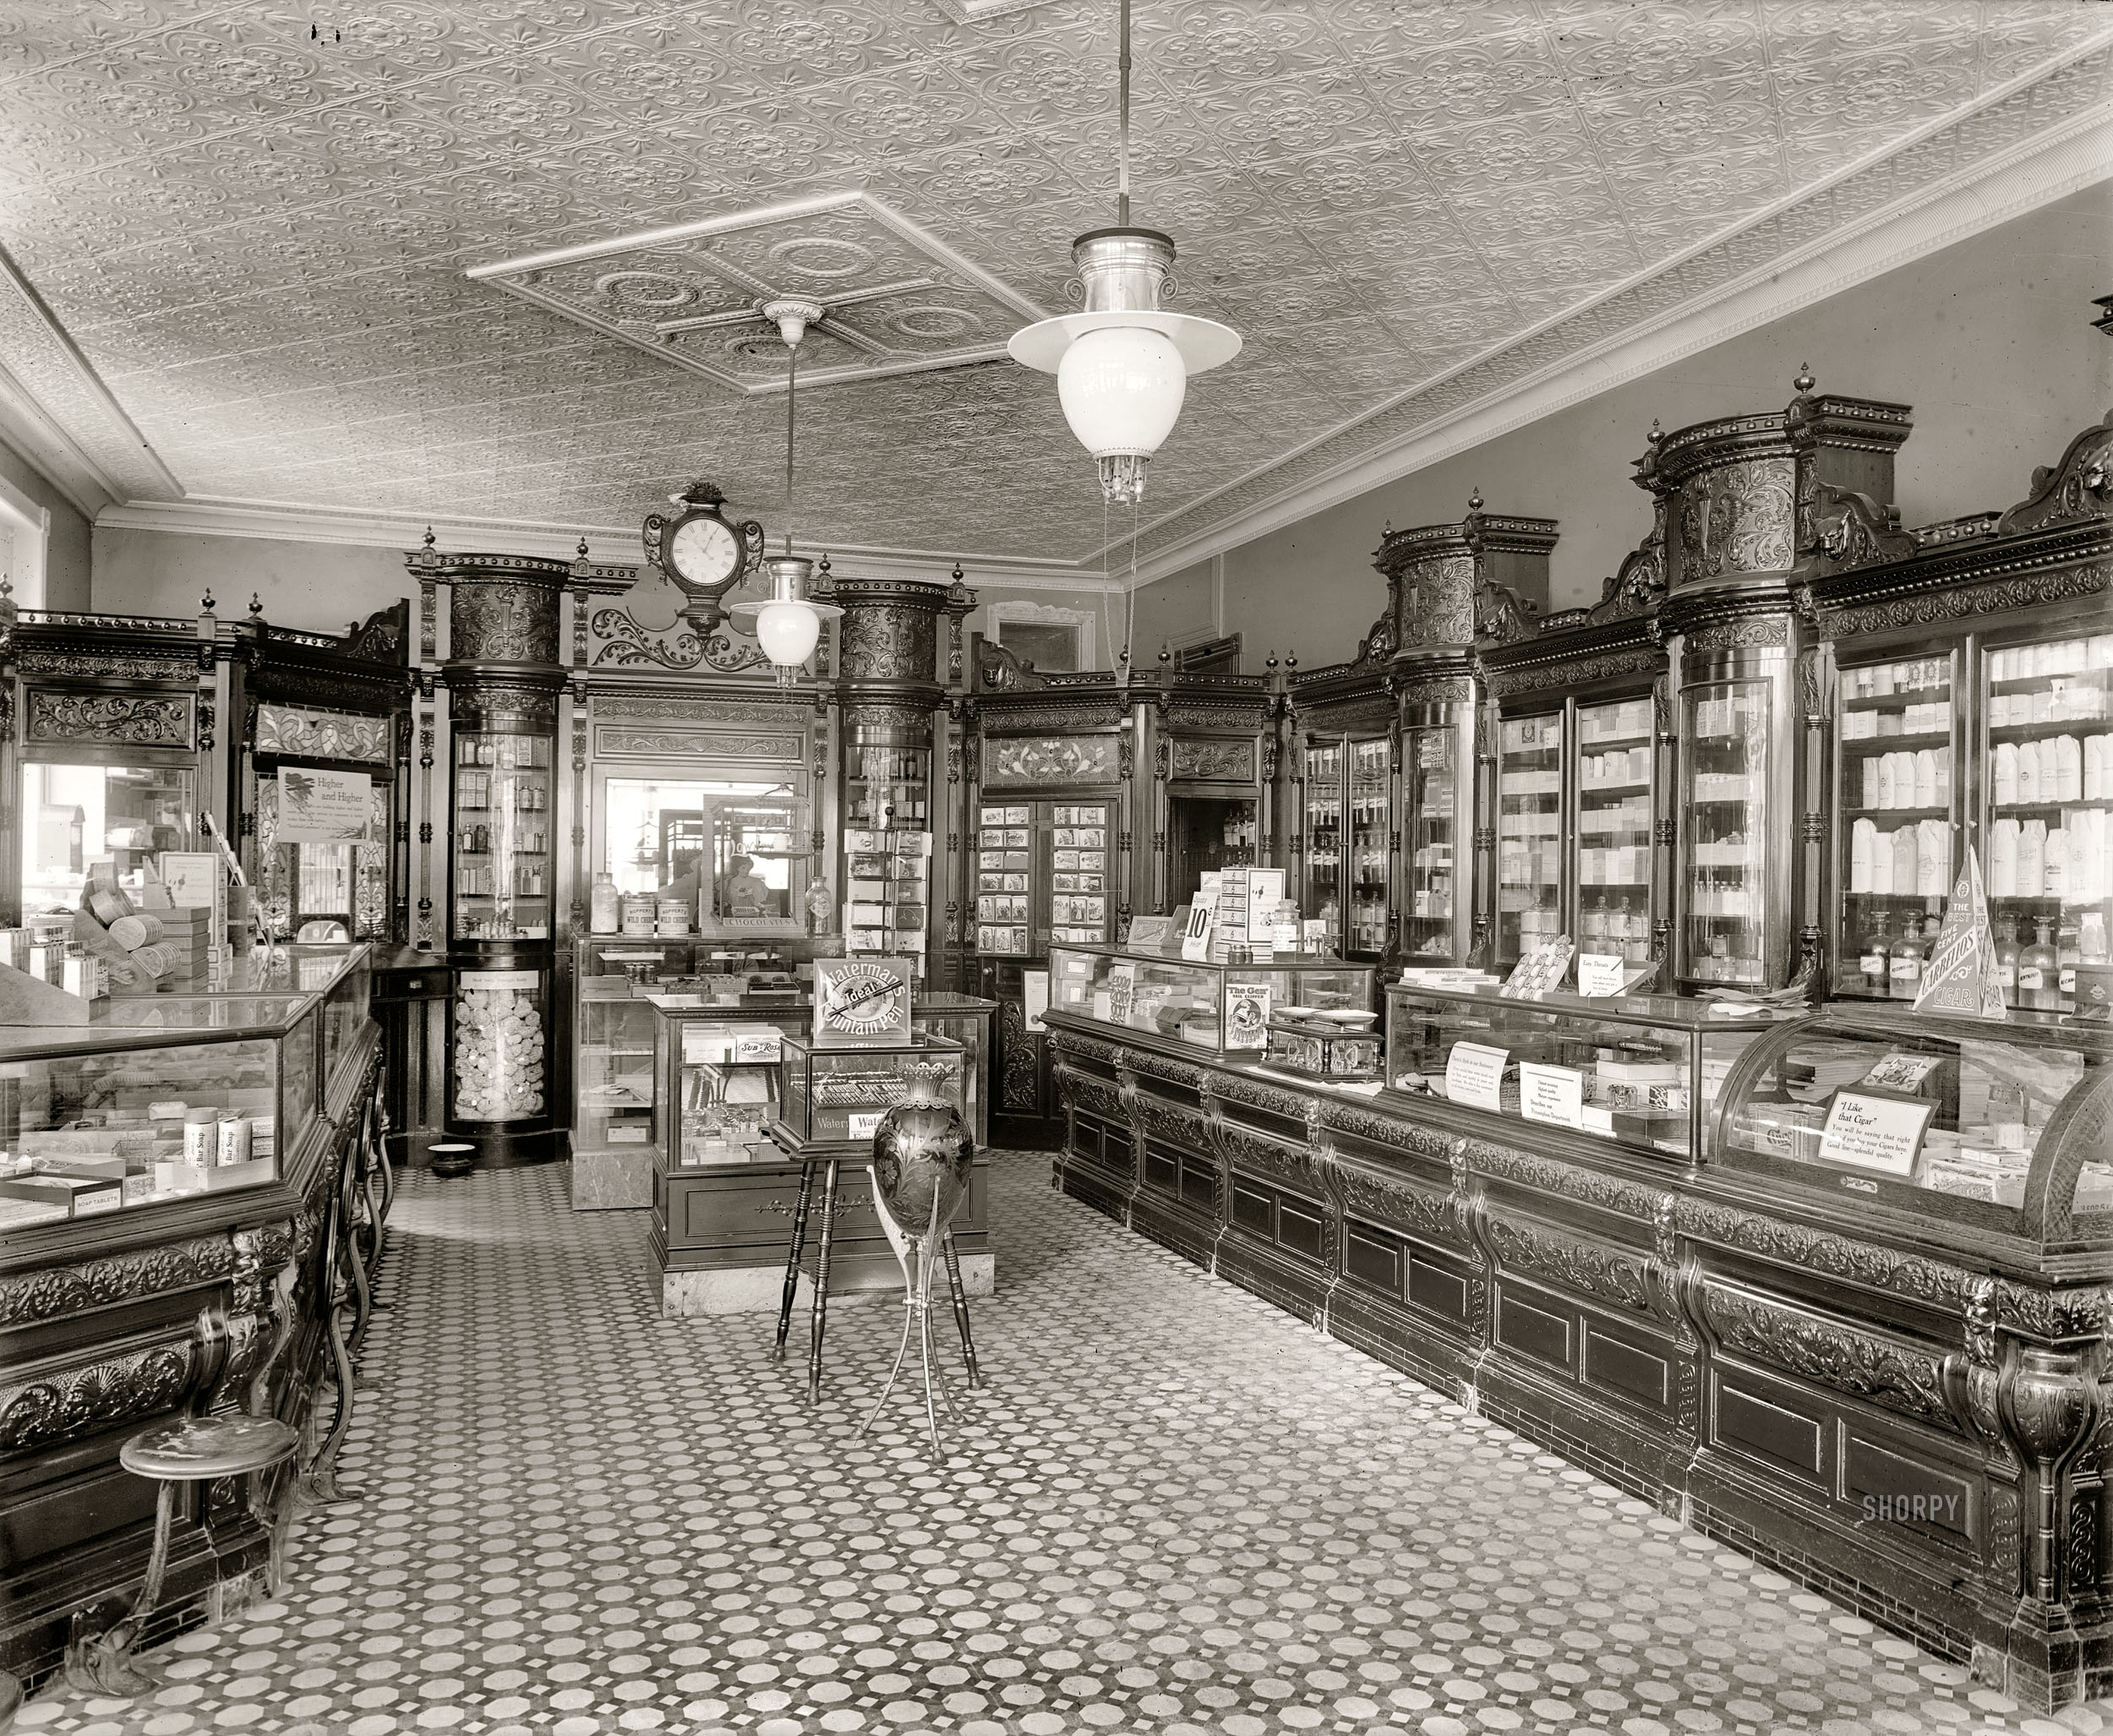 Washington, D.C., circa 1915. "Weller's drug store, Eighth & I streets S.E." National Photo Company Collection glass negative. View full size.